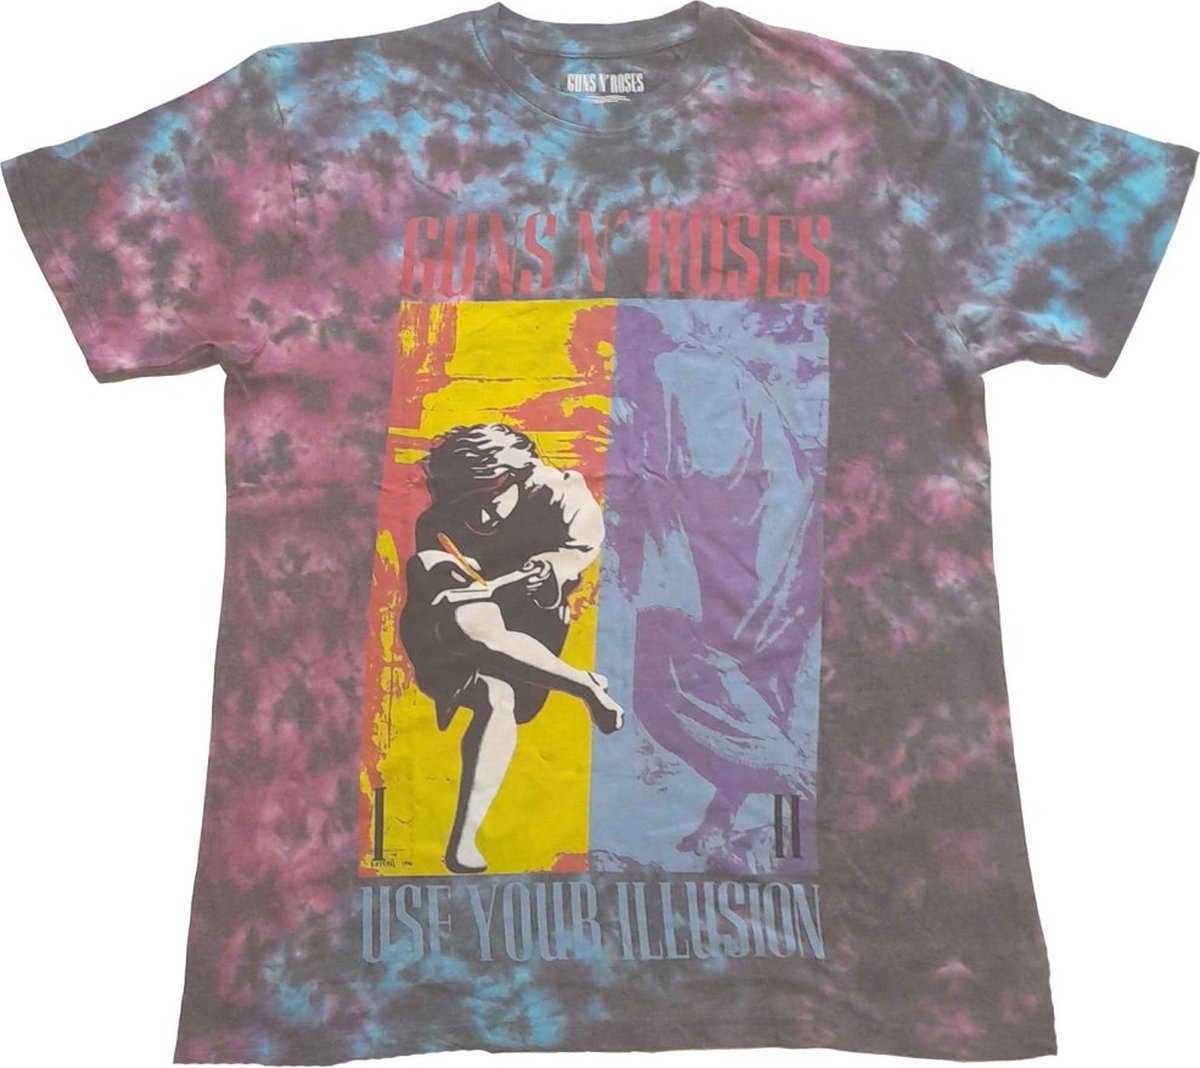 Guns N' Roses - Use Your Illusion Heren T-shirt - XL - Blauw/Rood